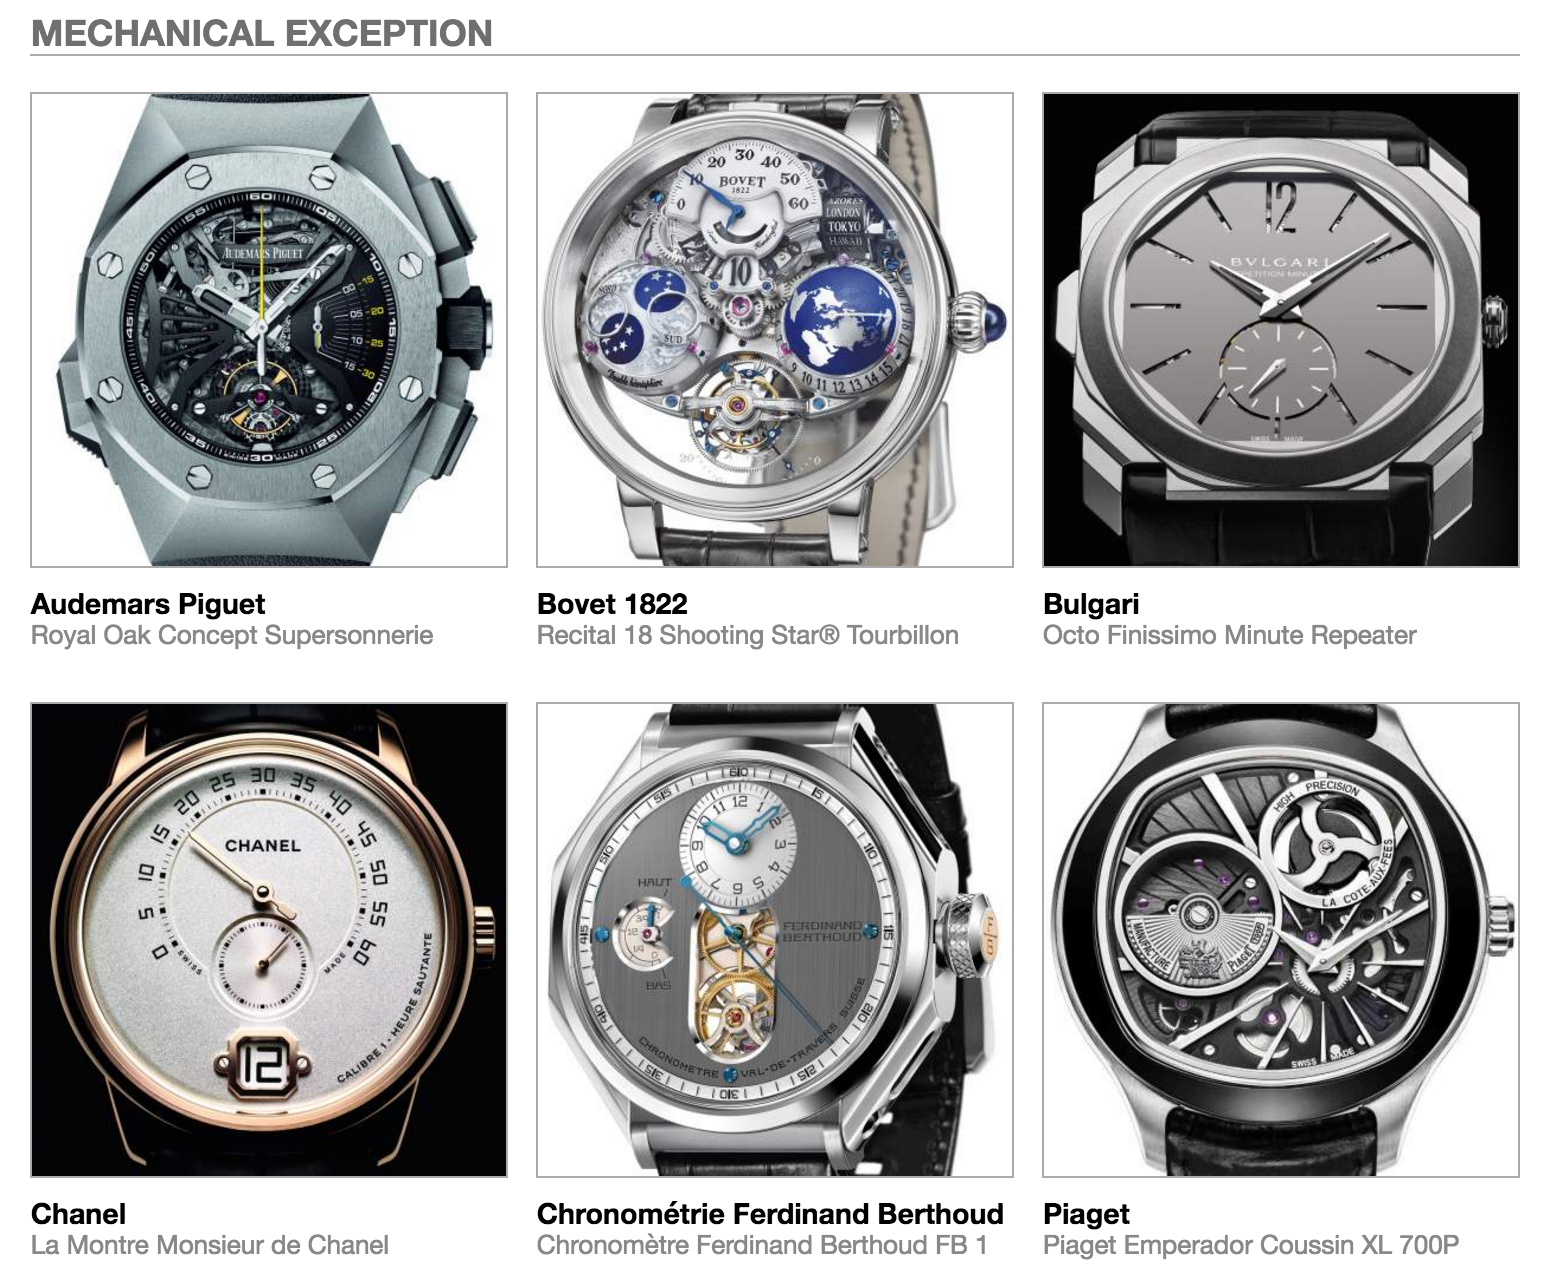 Pre-selected Mechanical Exception watches in the 2016 GPHG